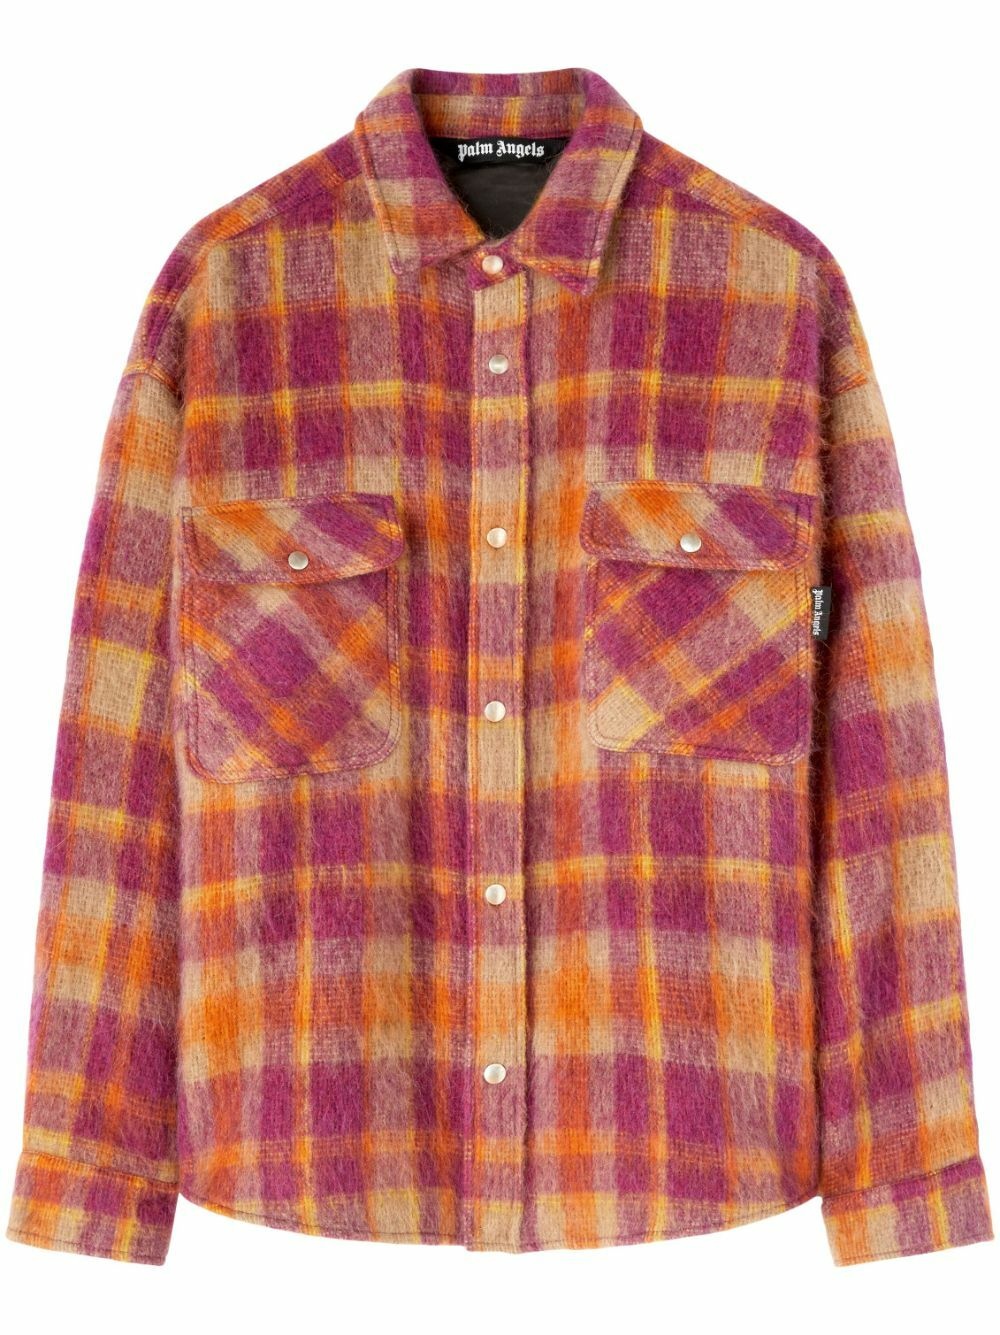 PALM ANGELS - Checked Wool Overshirt Palm Angels